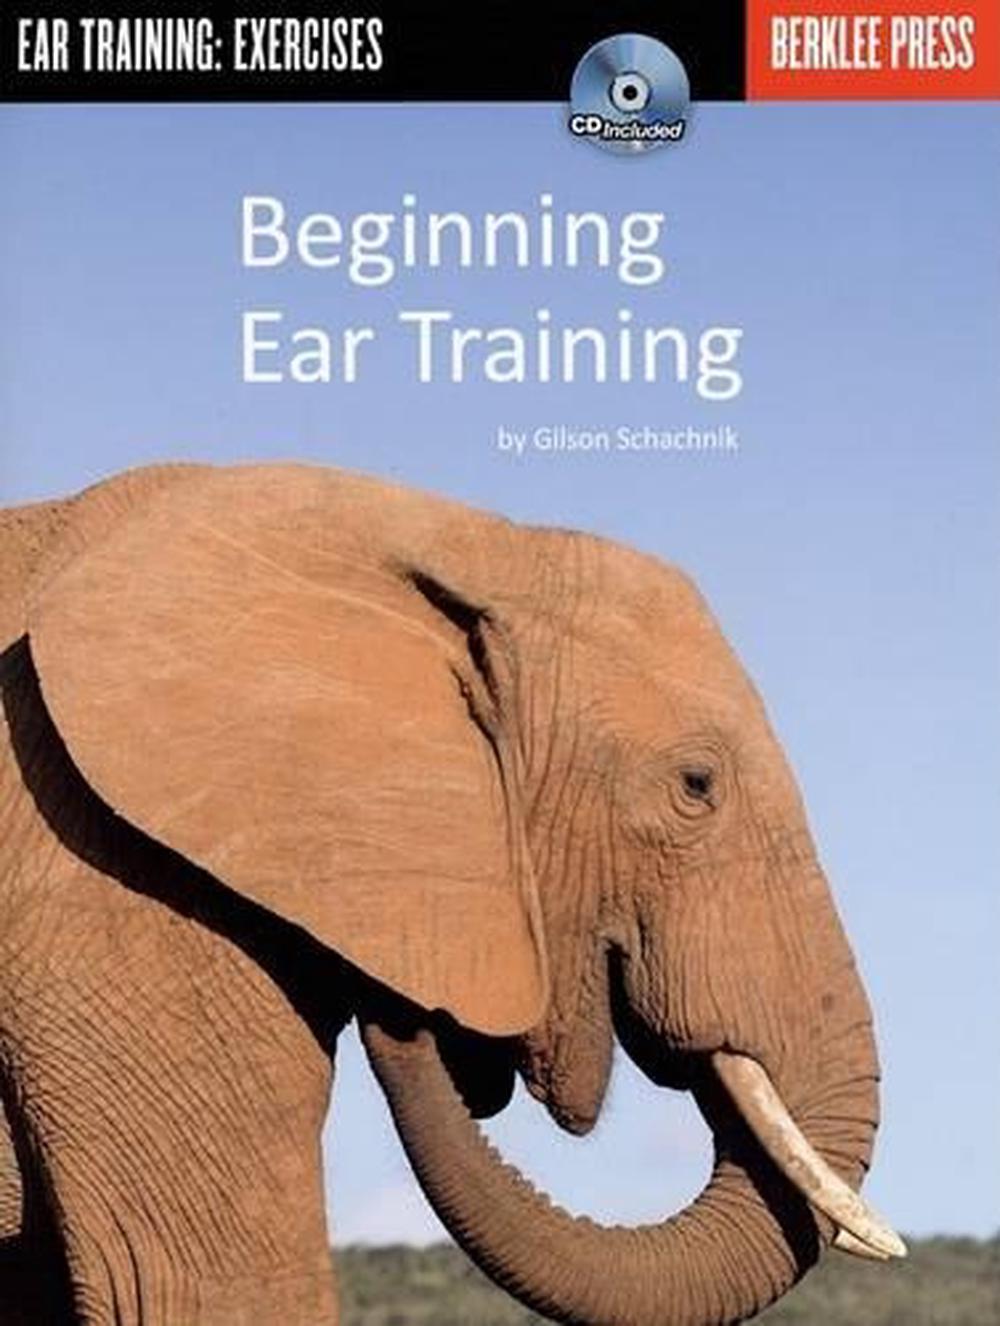 8 notes ear trainer